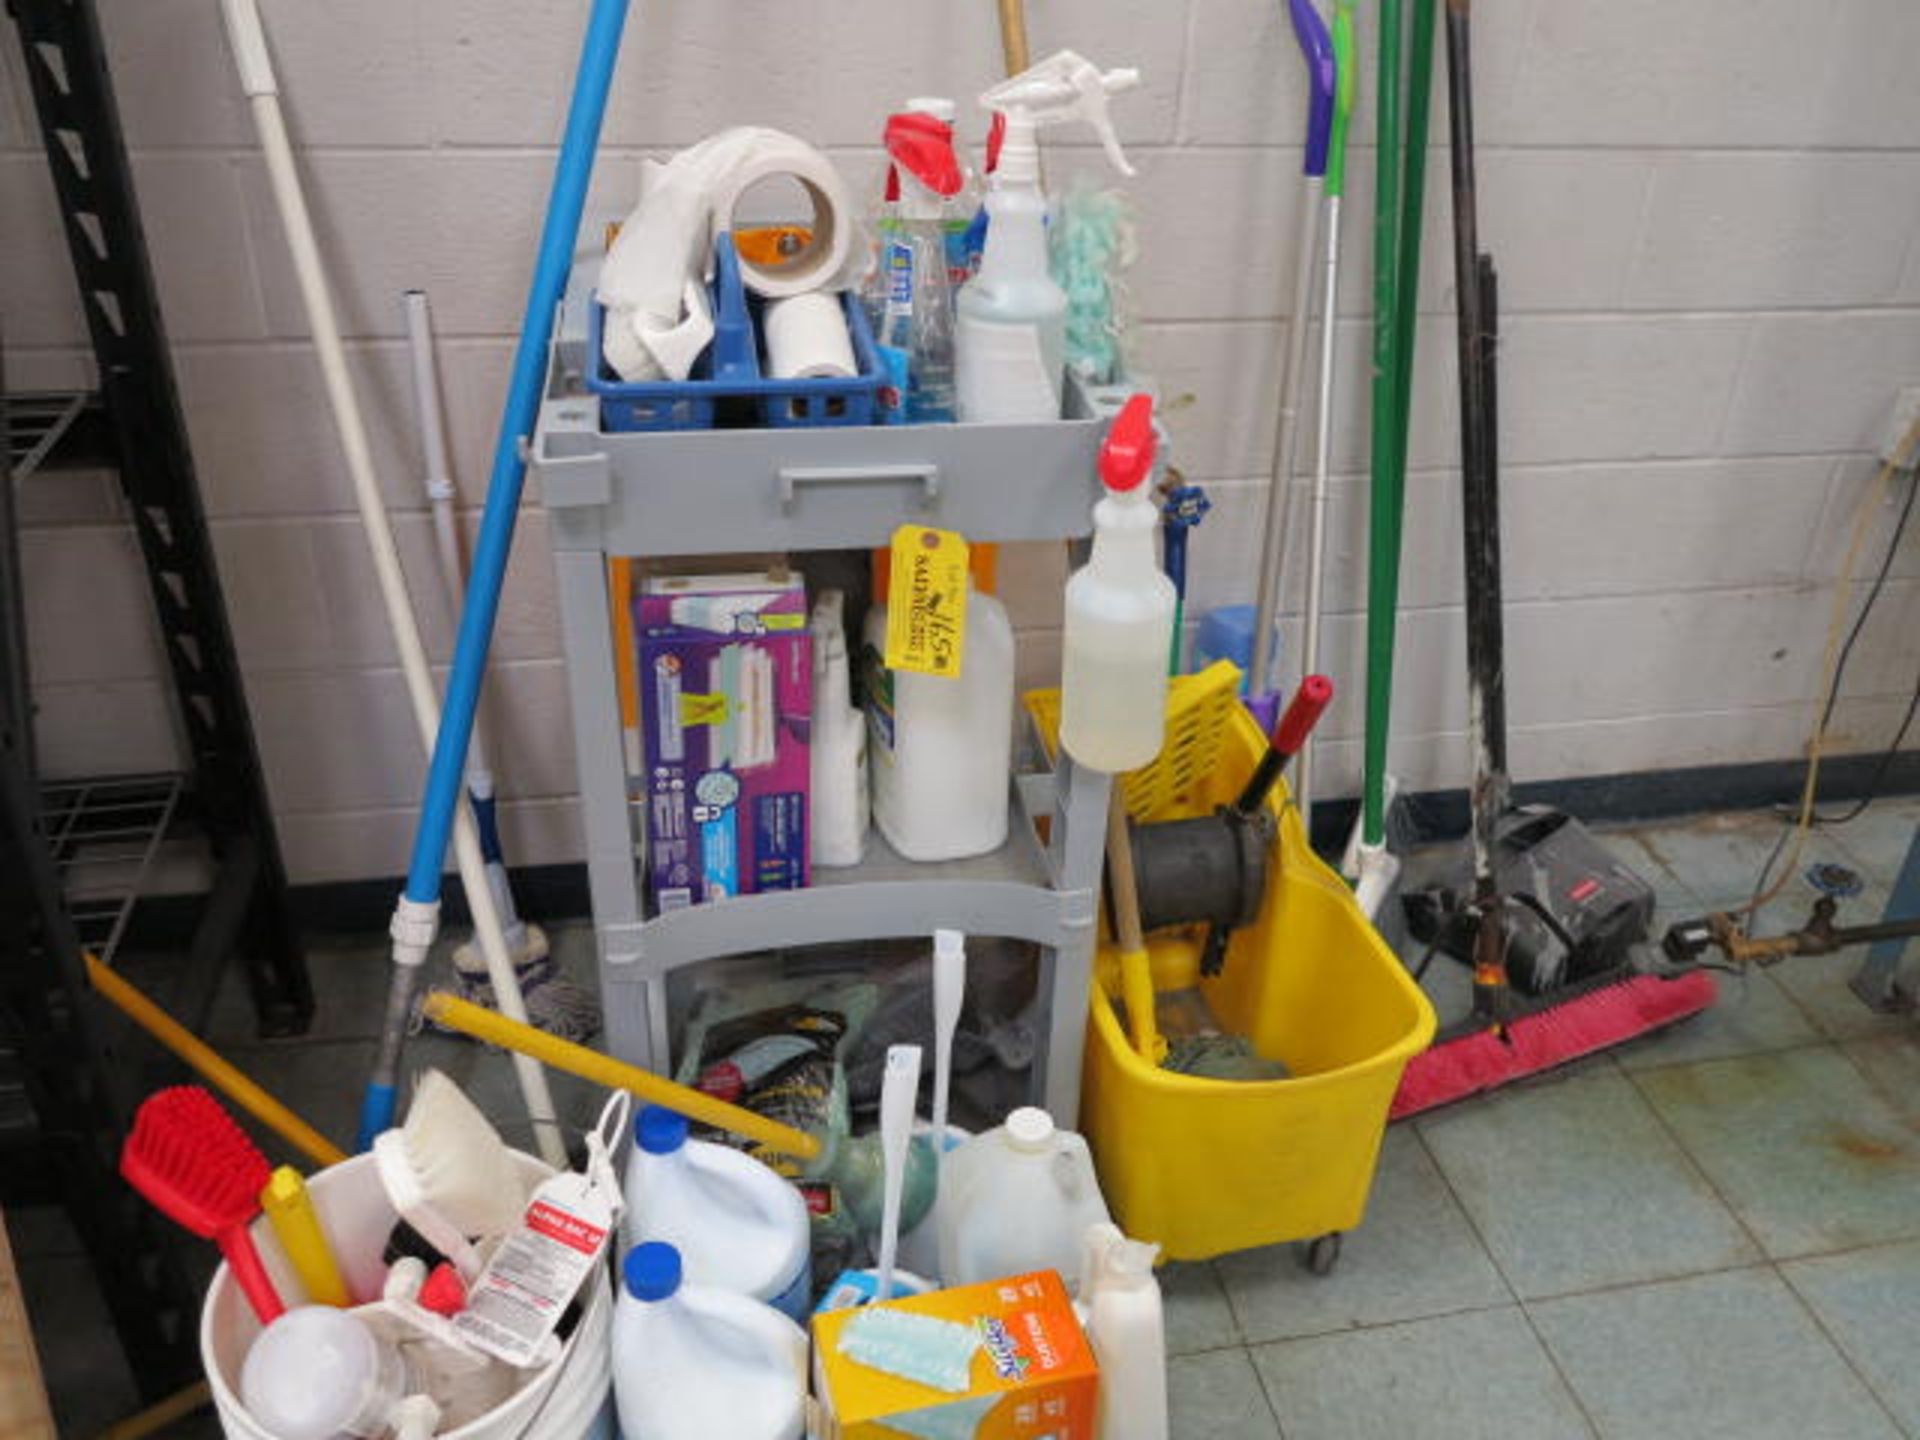 Cleaning Supplies and Cleaning Cart